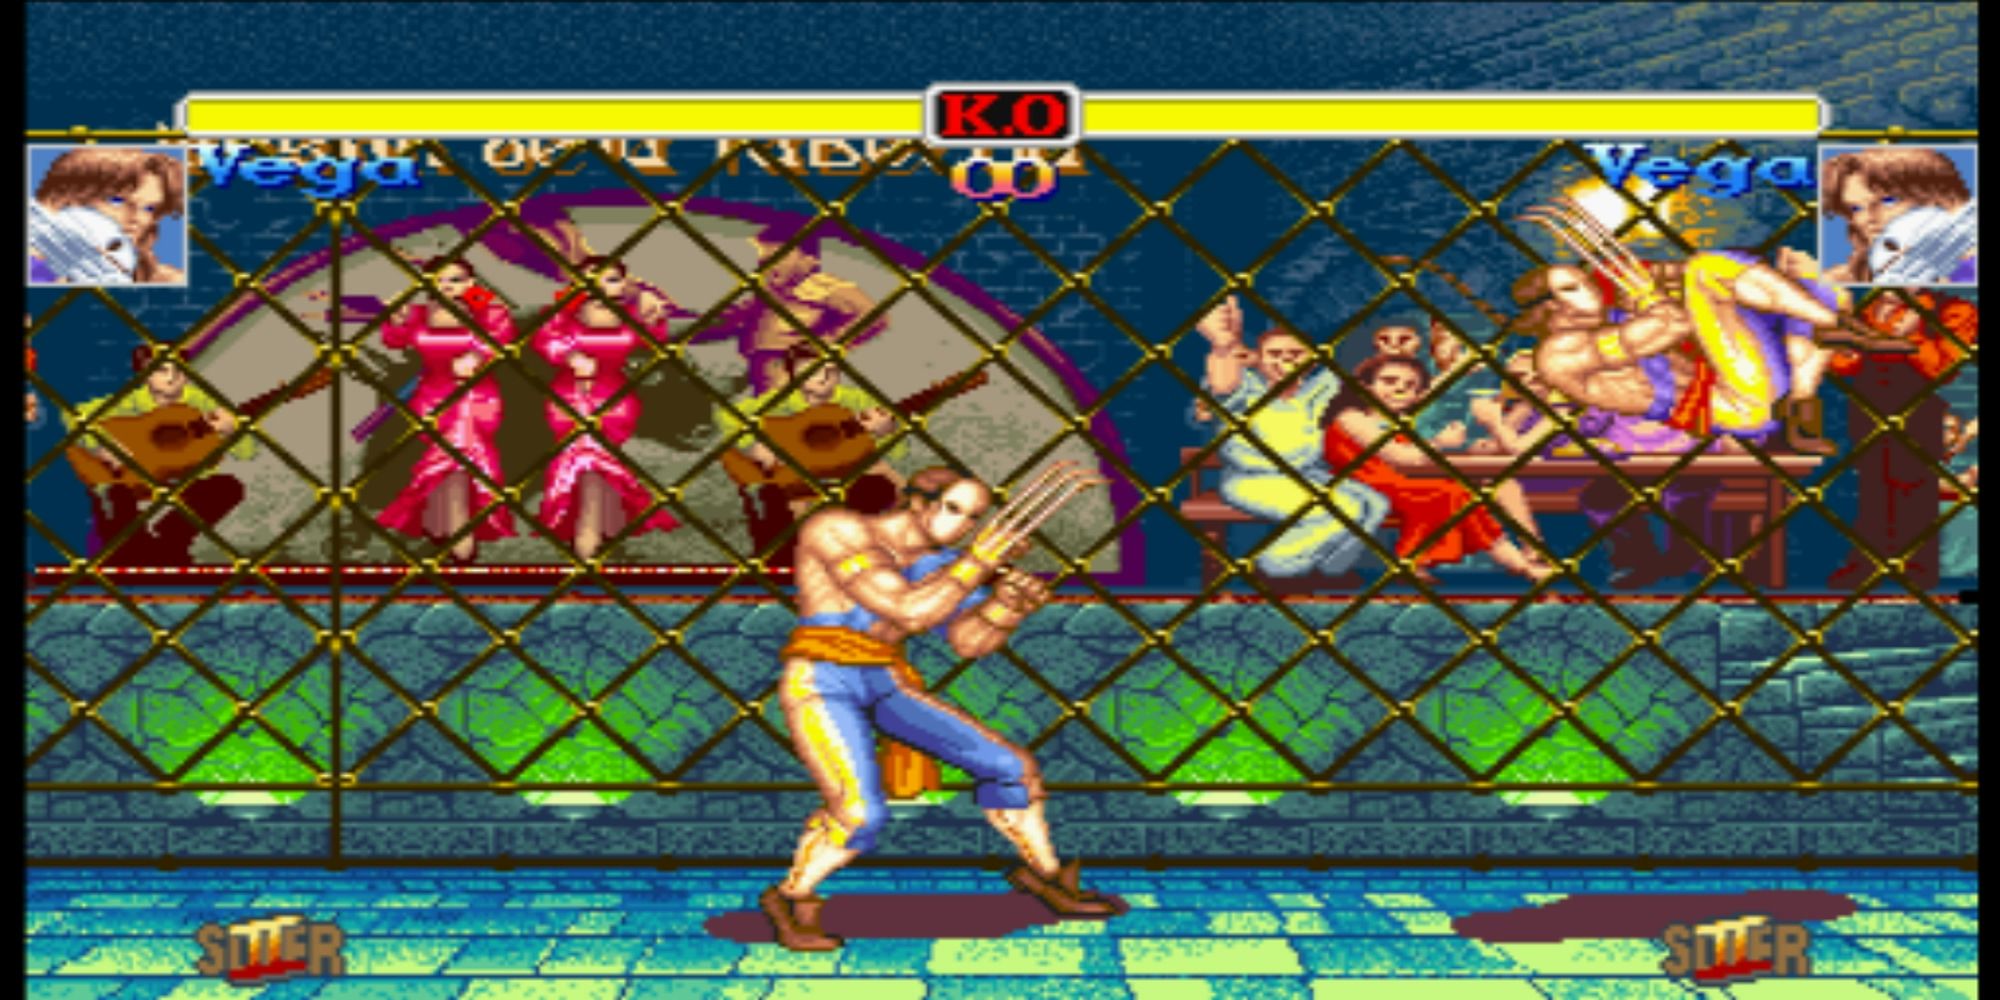 Super SF2 Vega bounces off the wall of a Flamenco Tavern in Spain in Hyper Street Fighter 2.